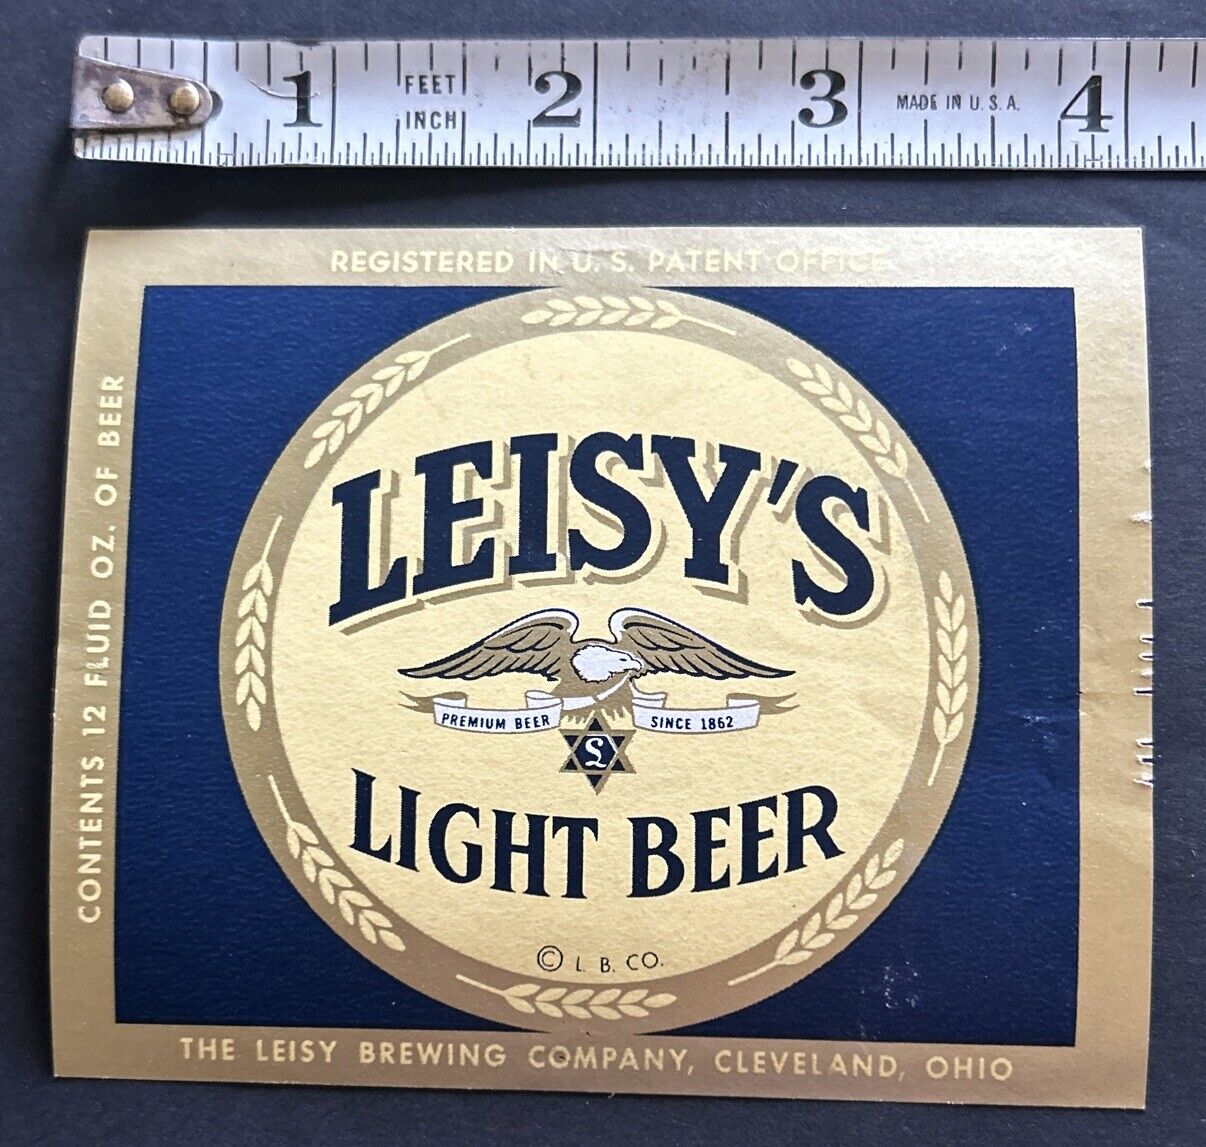 VINTAGE LEISY’S LIGHT BEER 12 OZ. BOTTLE LABEL, LEISY BREWING CO., CLEVELAND, OH